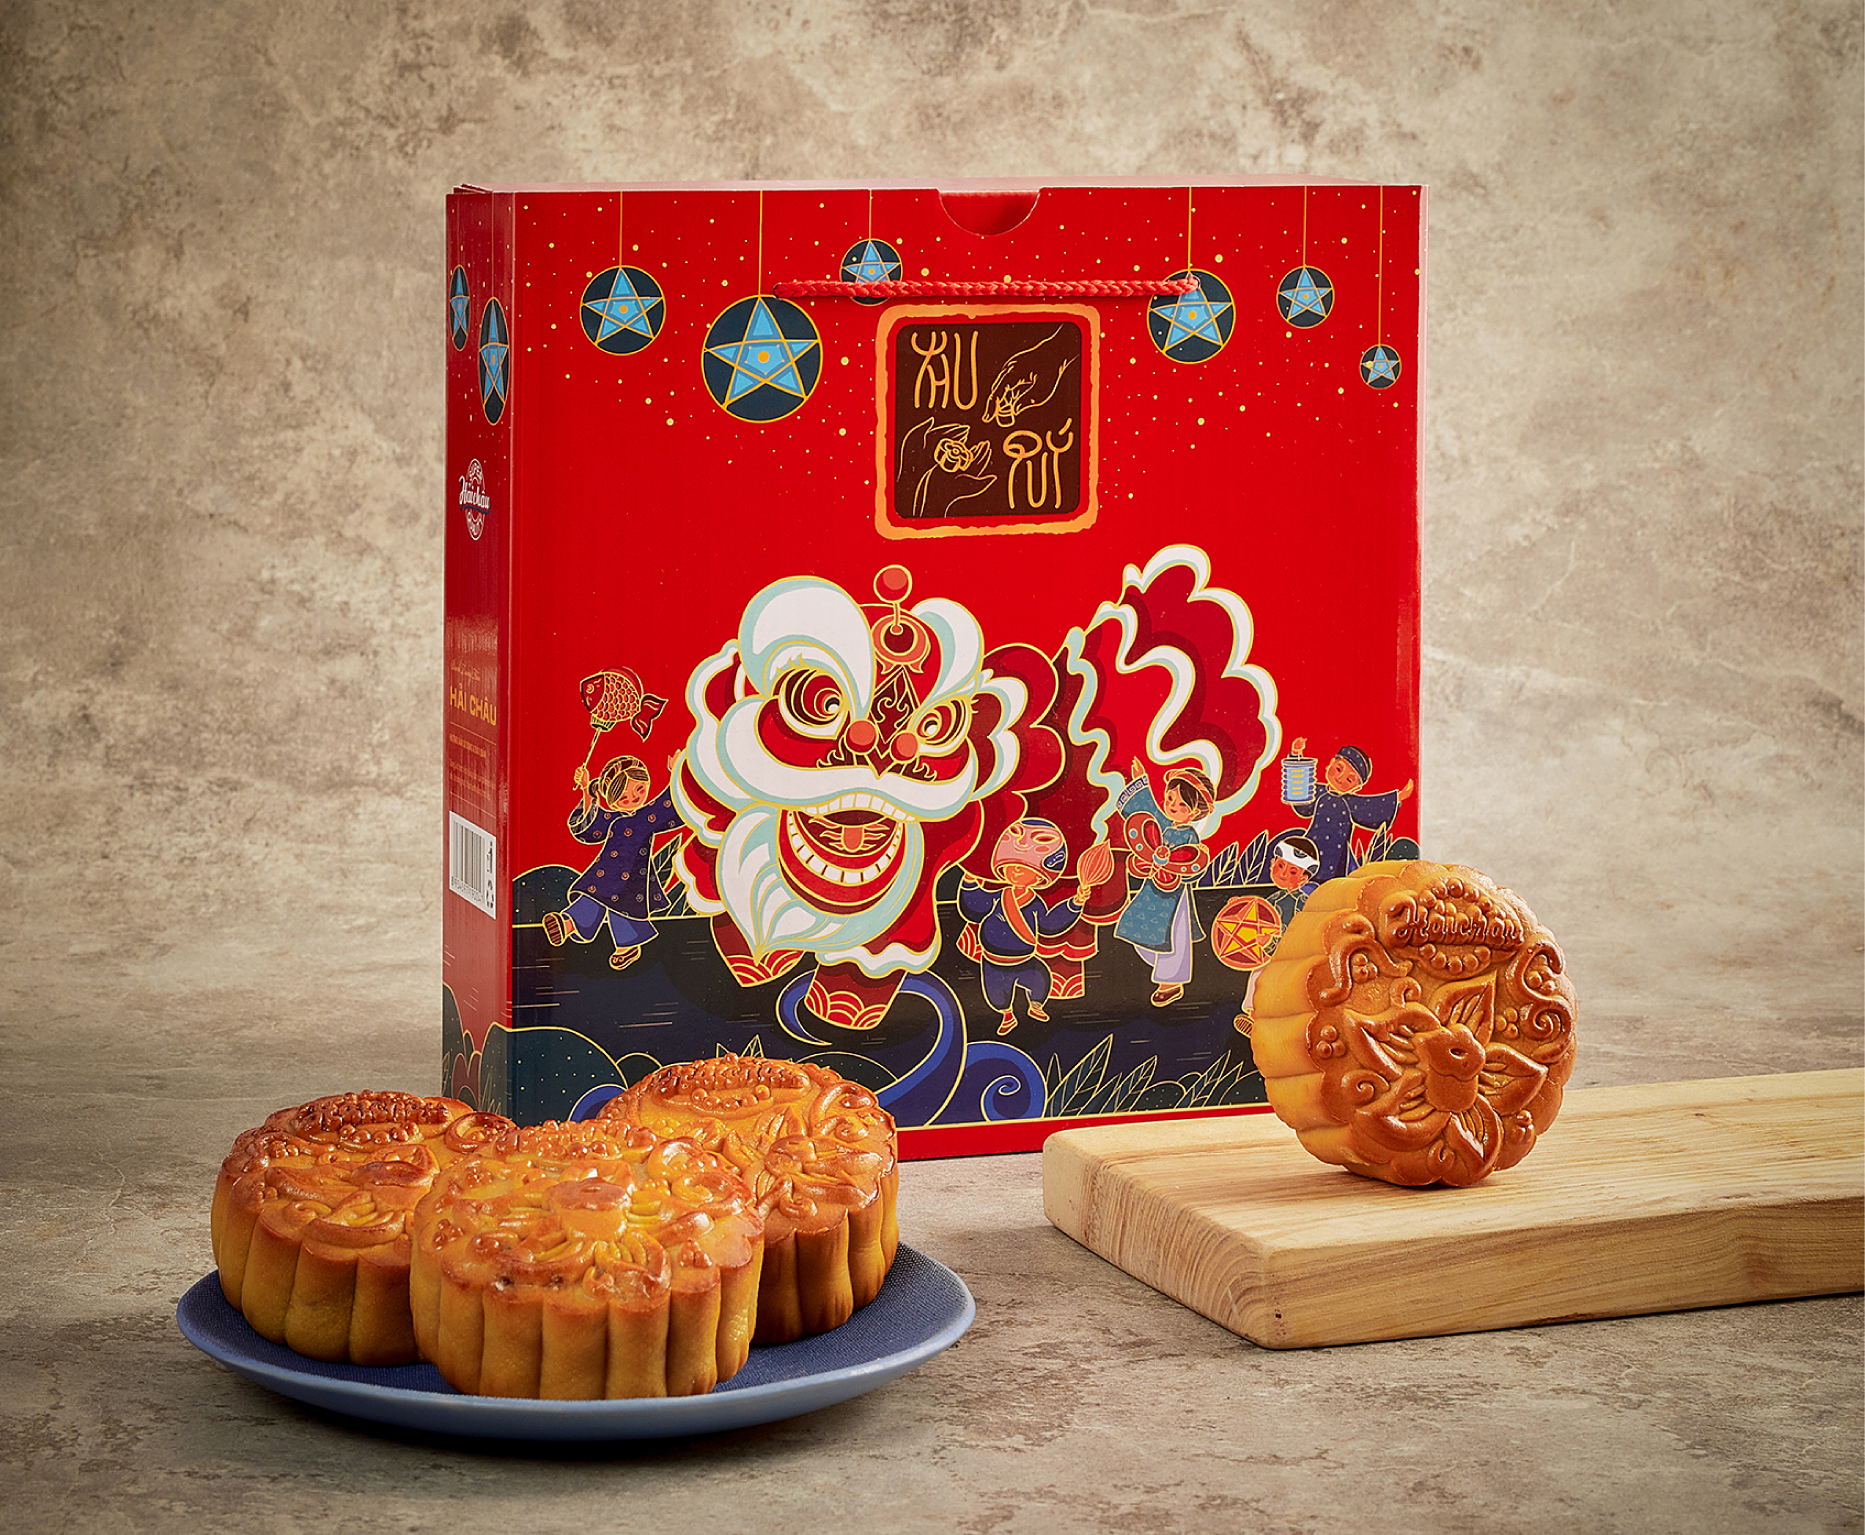 Hai Chau's Mooncake Packaging Comes With Stunningly Detailed Illustrations, Dieline